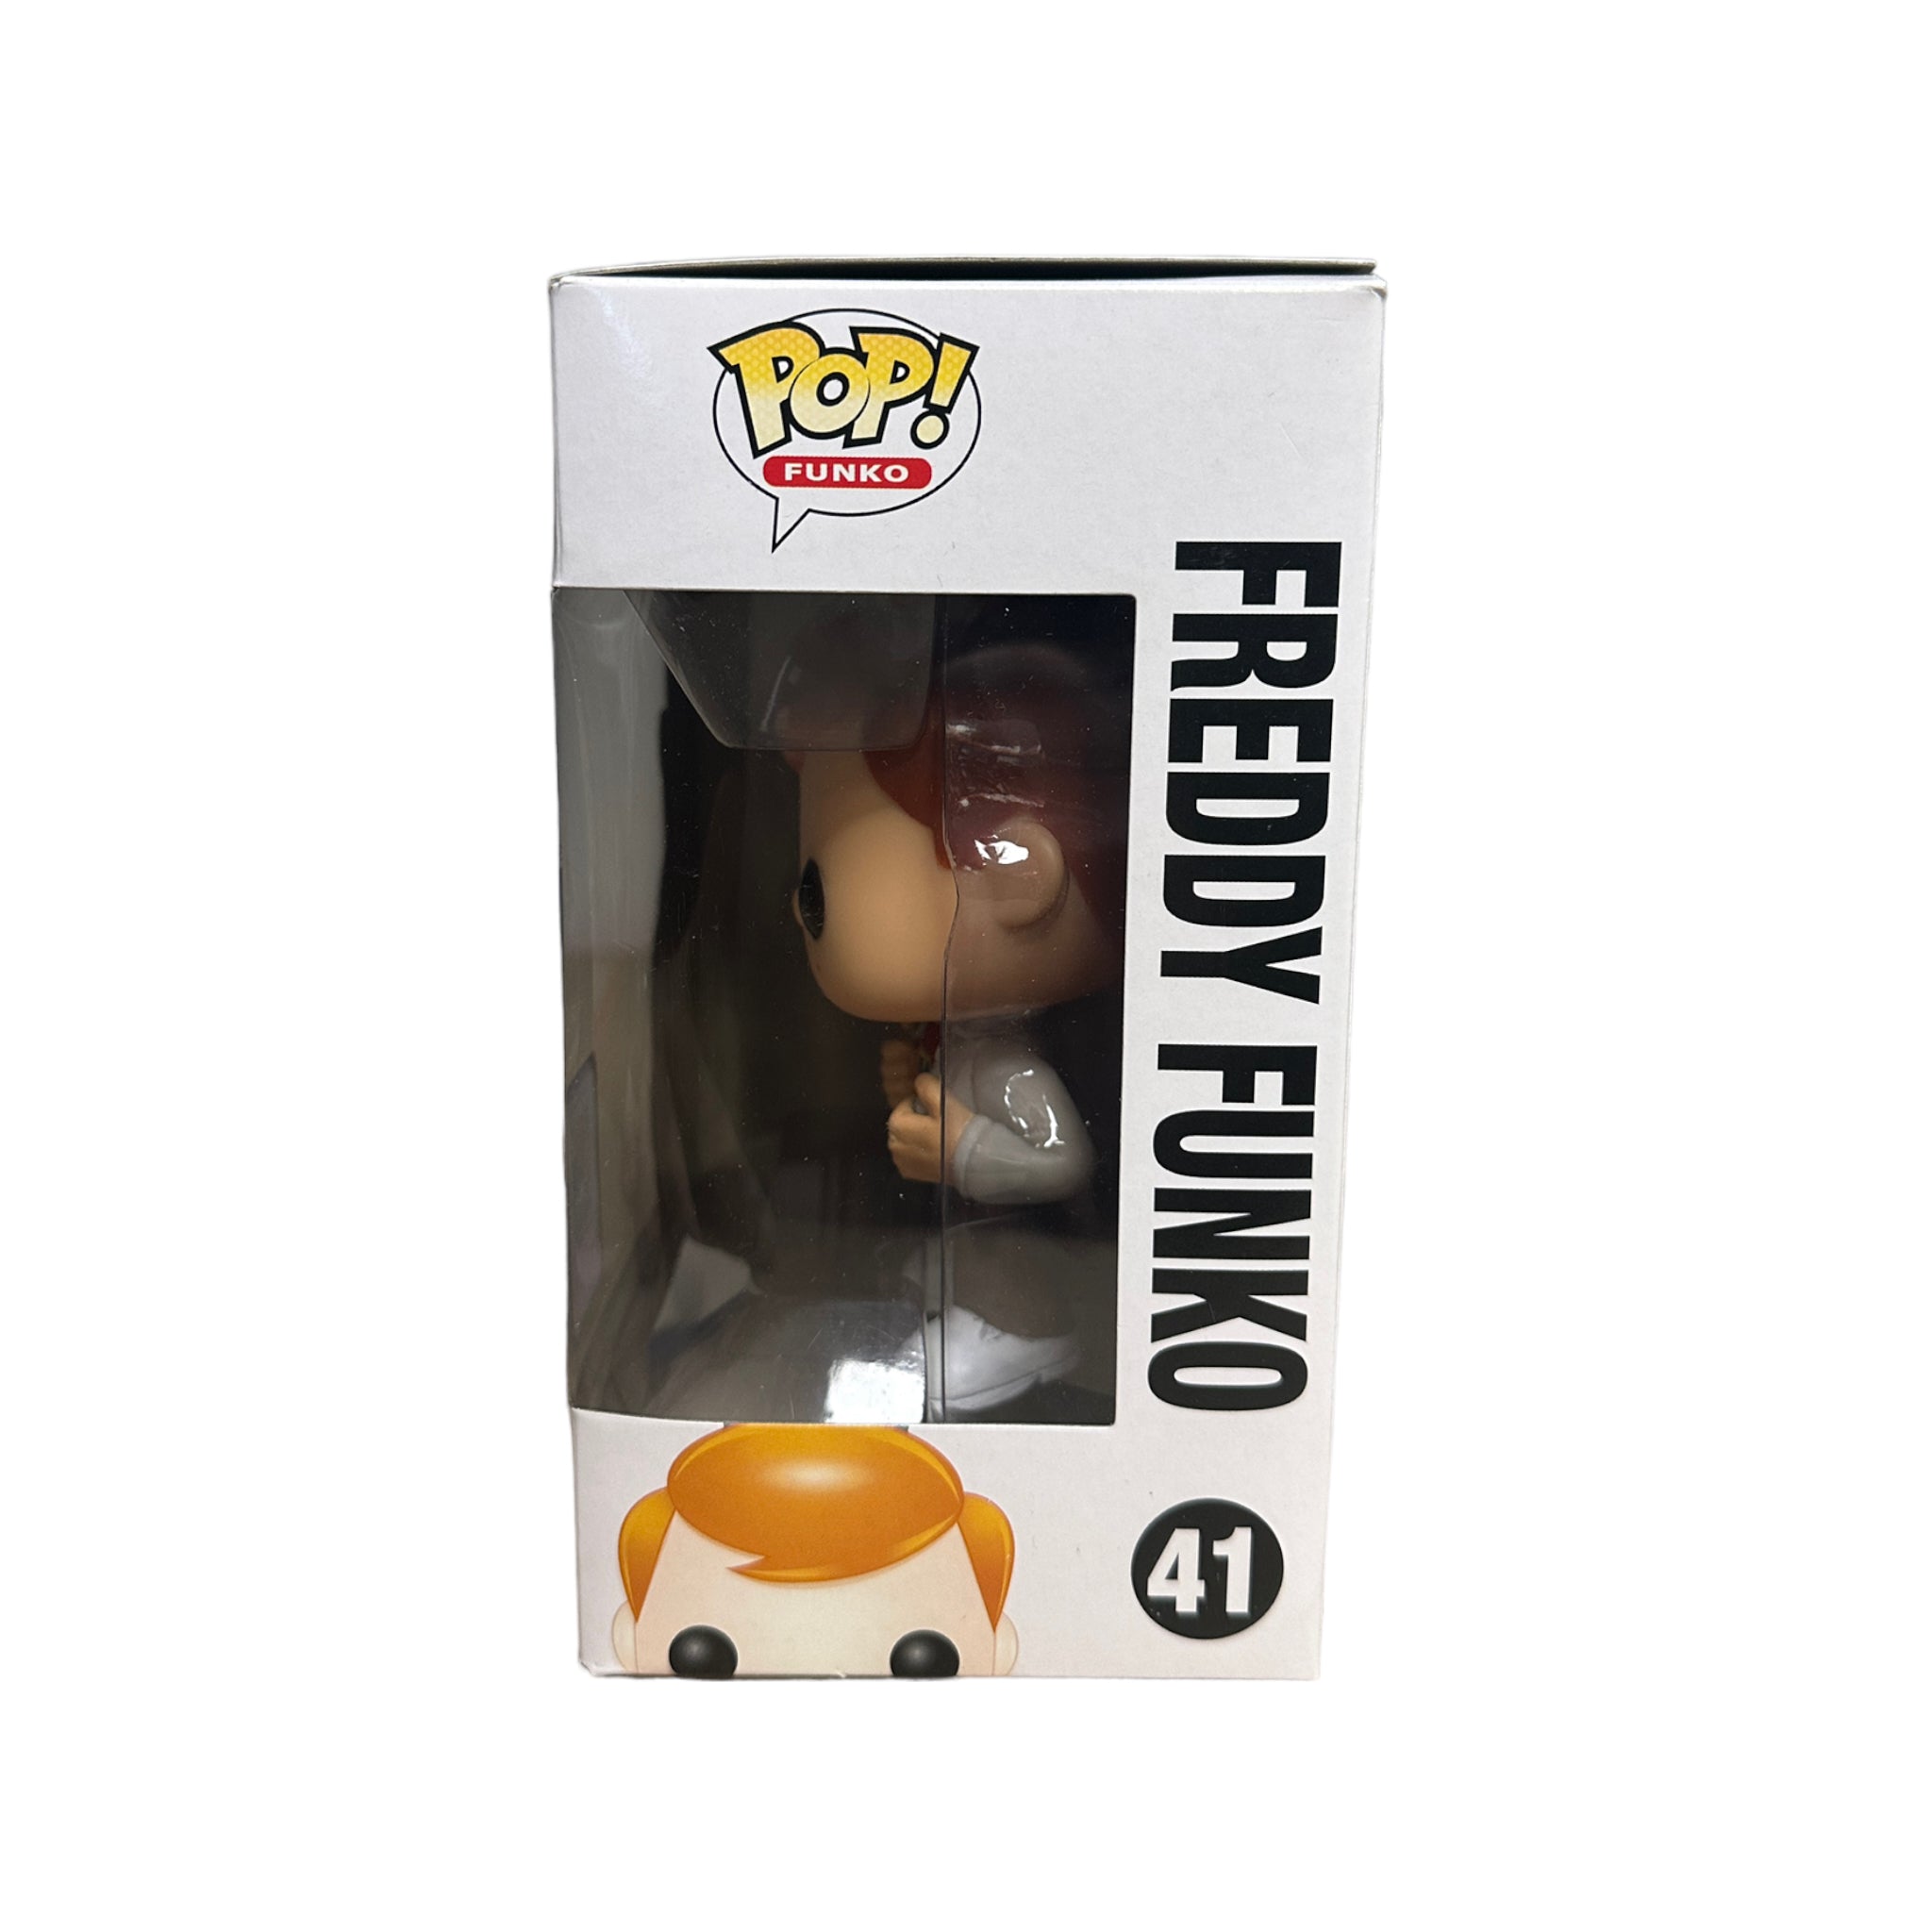 Freddy Funko as Stan Lee (Red) #41 Funko Pop! - SDCC 2015 Exclusive LE96 Pcs - Condition 8.5/10